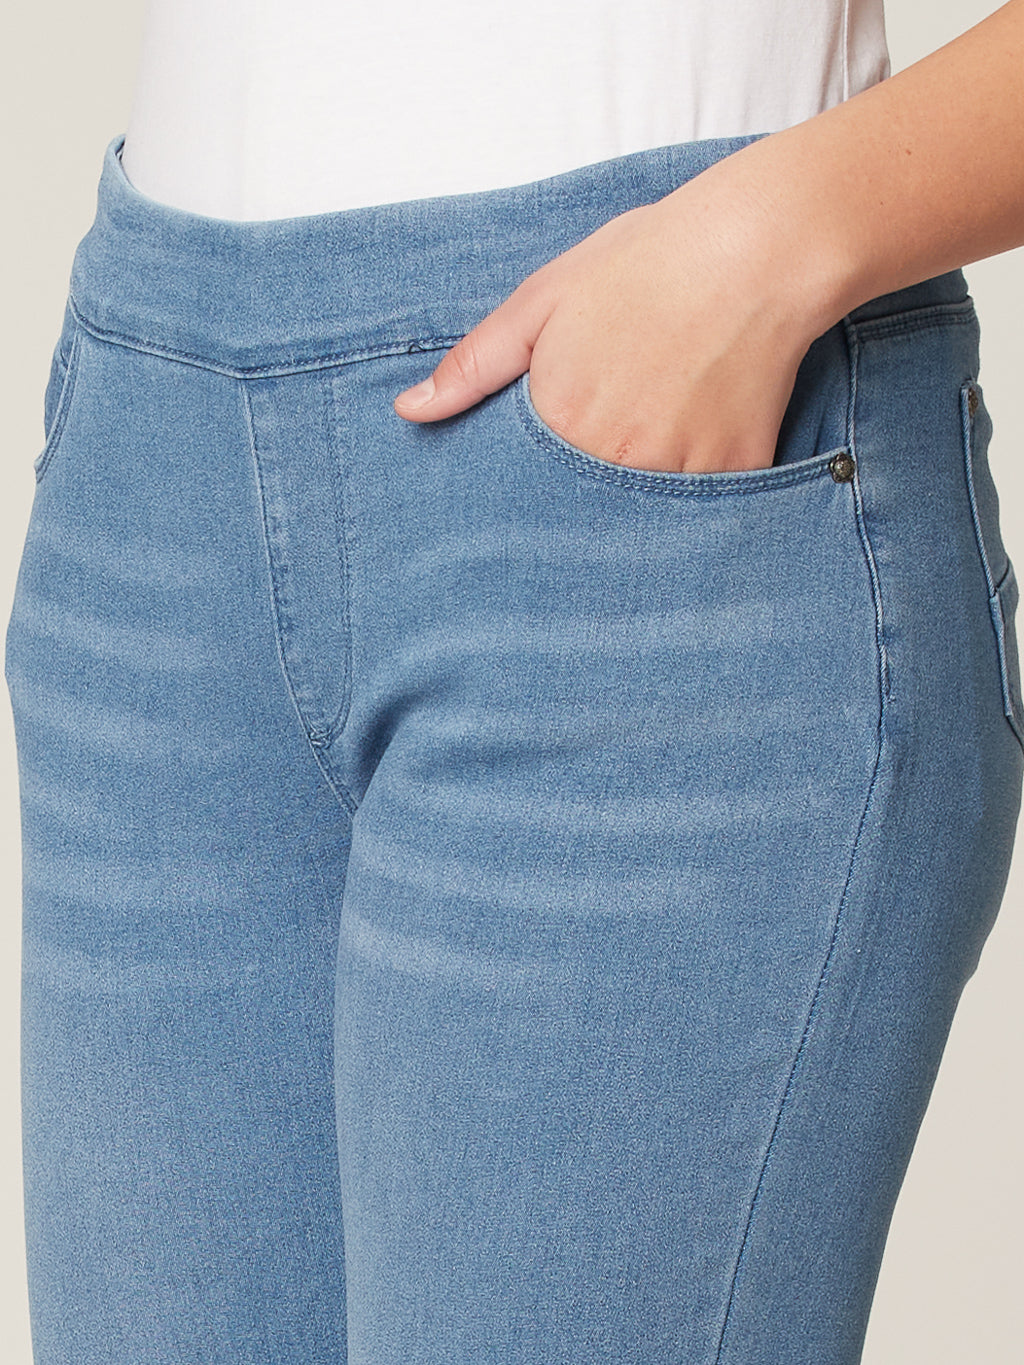 Skinny semi-fitted pull-on jean